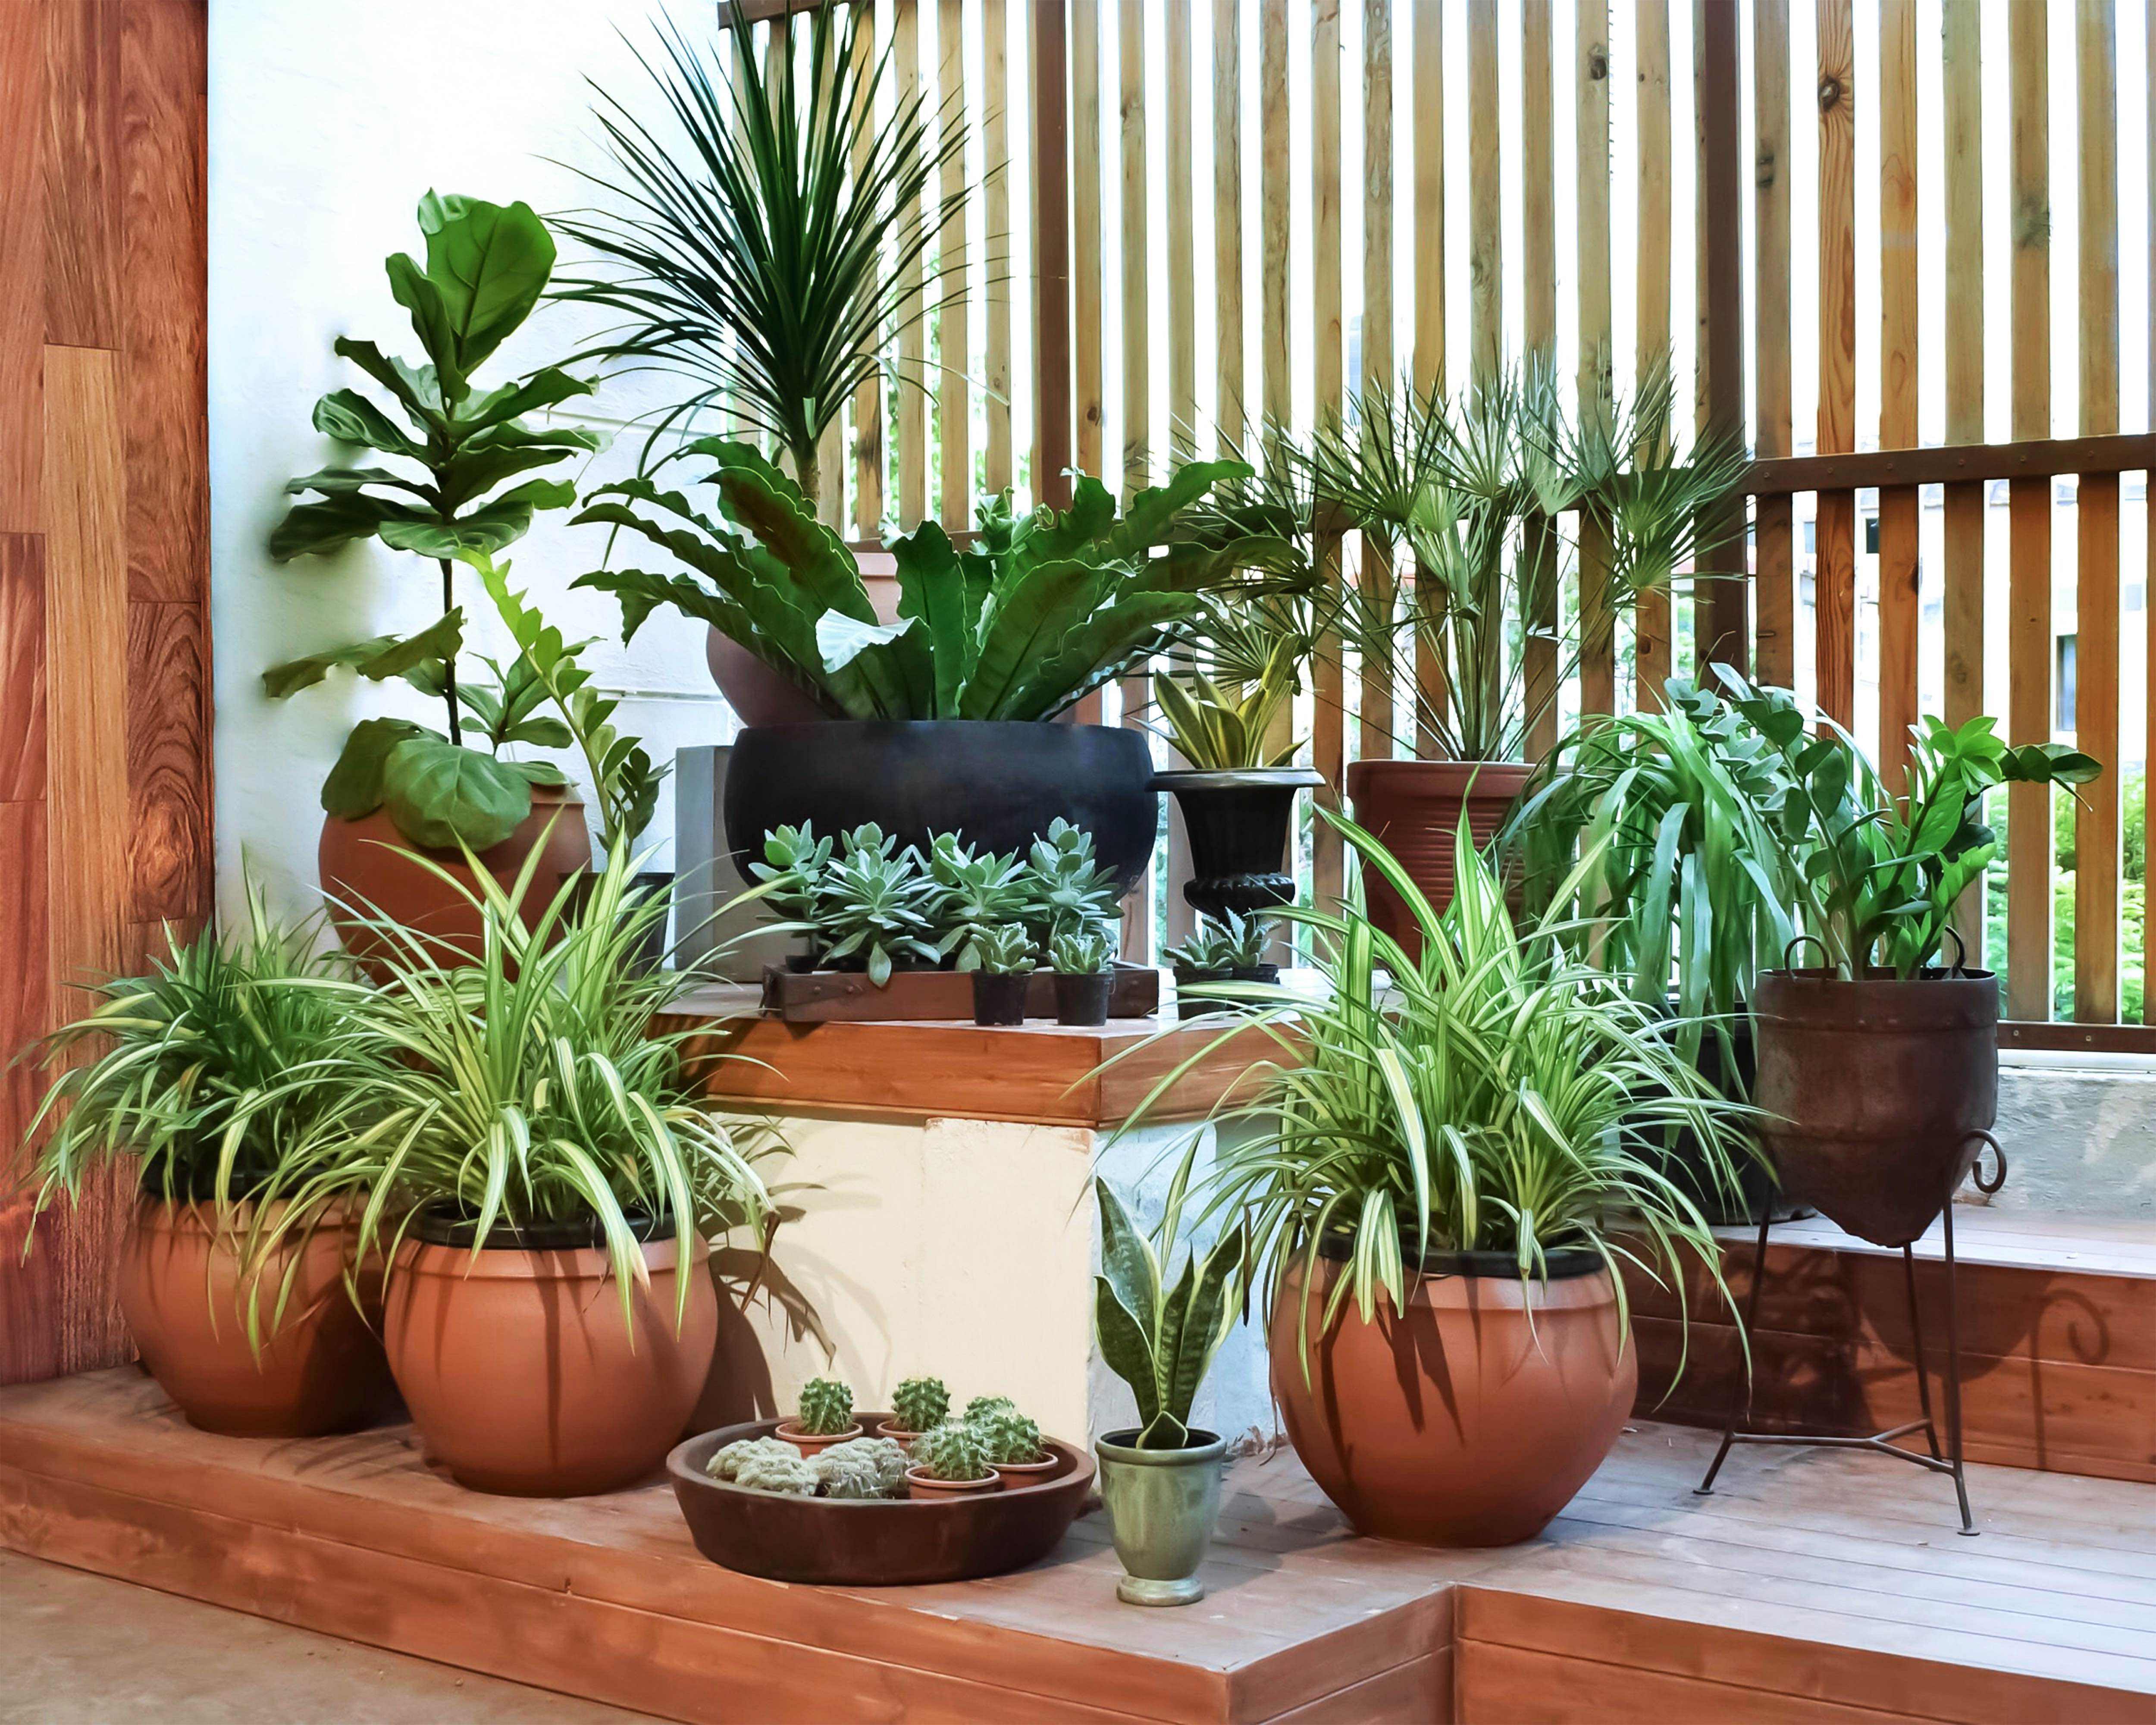 Plants give a fresh look to the interiors of your house, bring down temperatures and purify air quality.